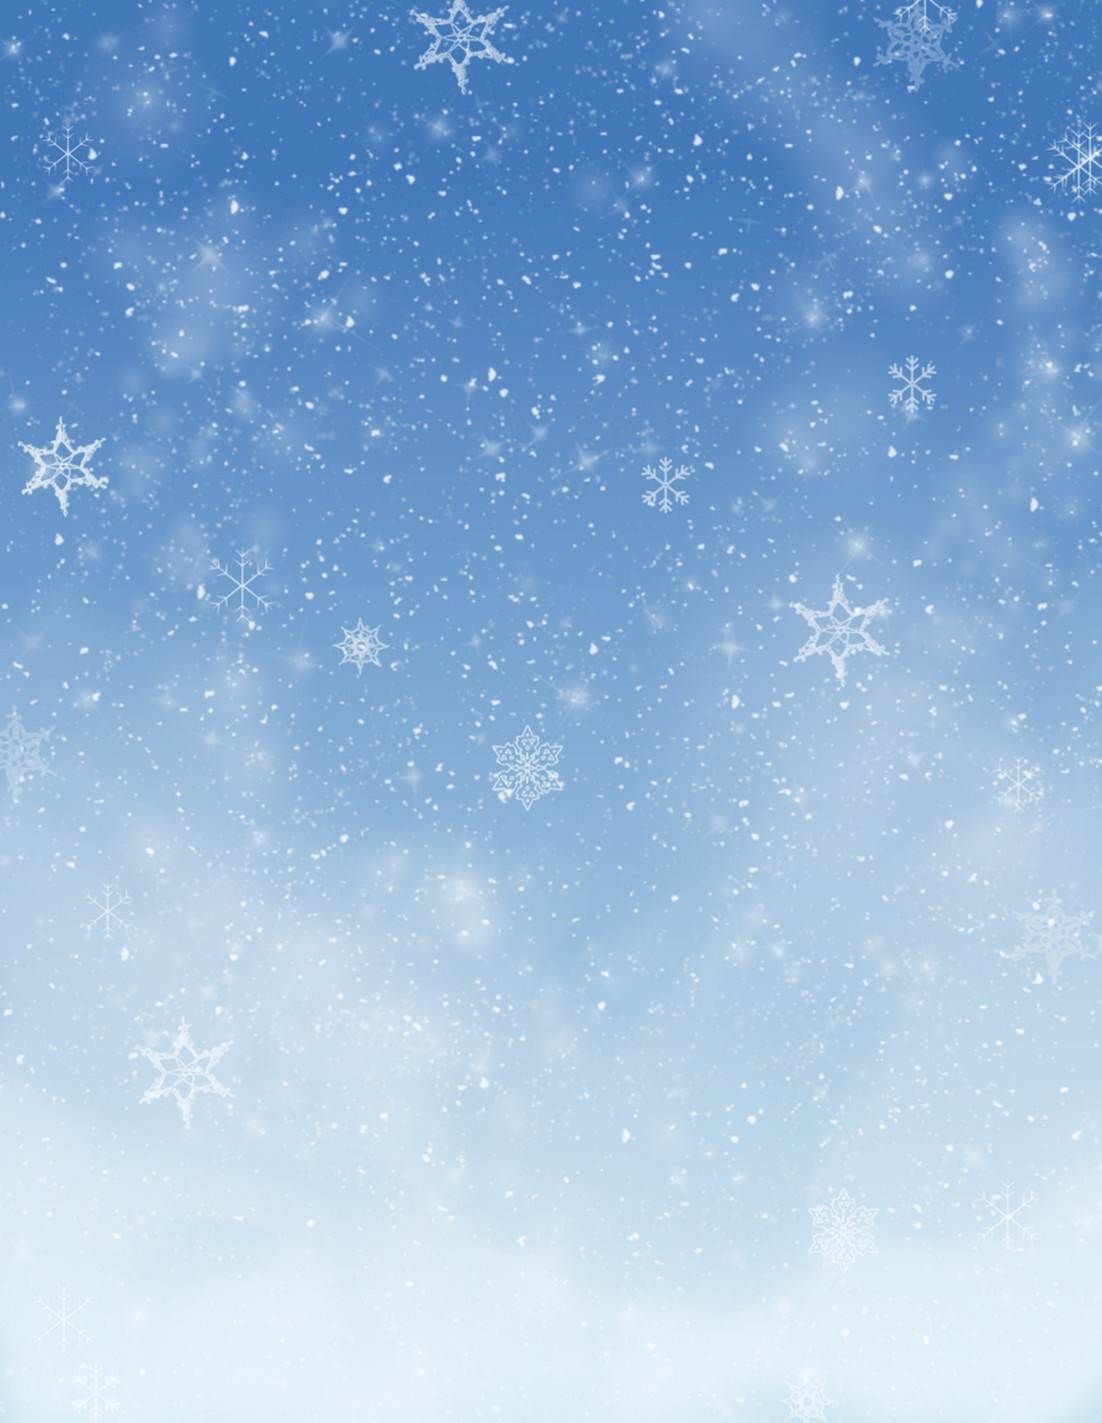 14 Snowflakes Live Wallpapers, Animated Wallpapers - MoeWalls